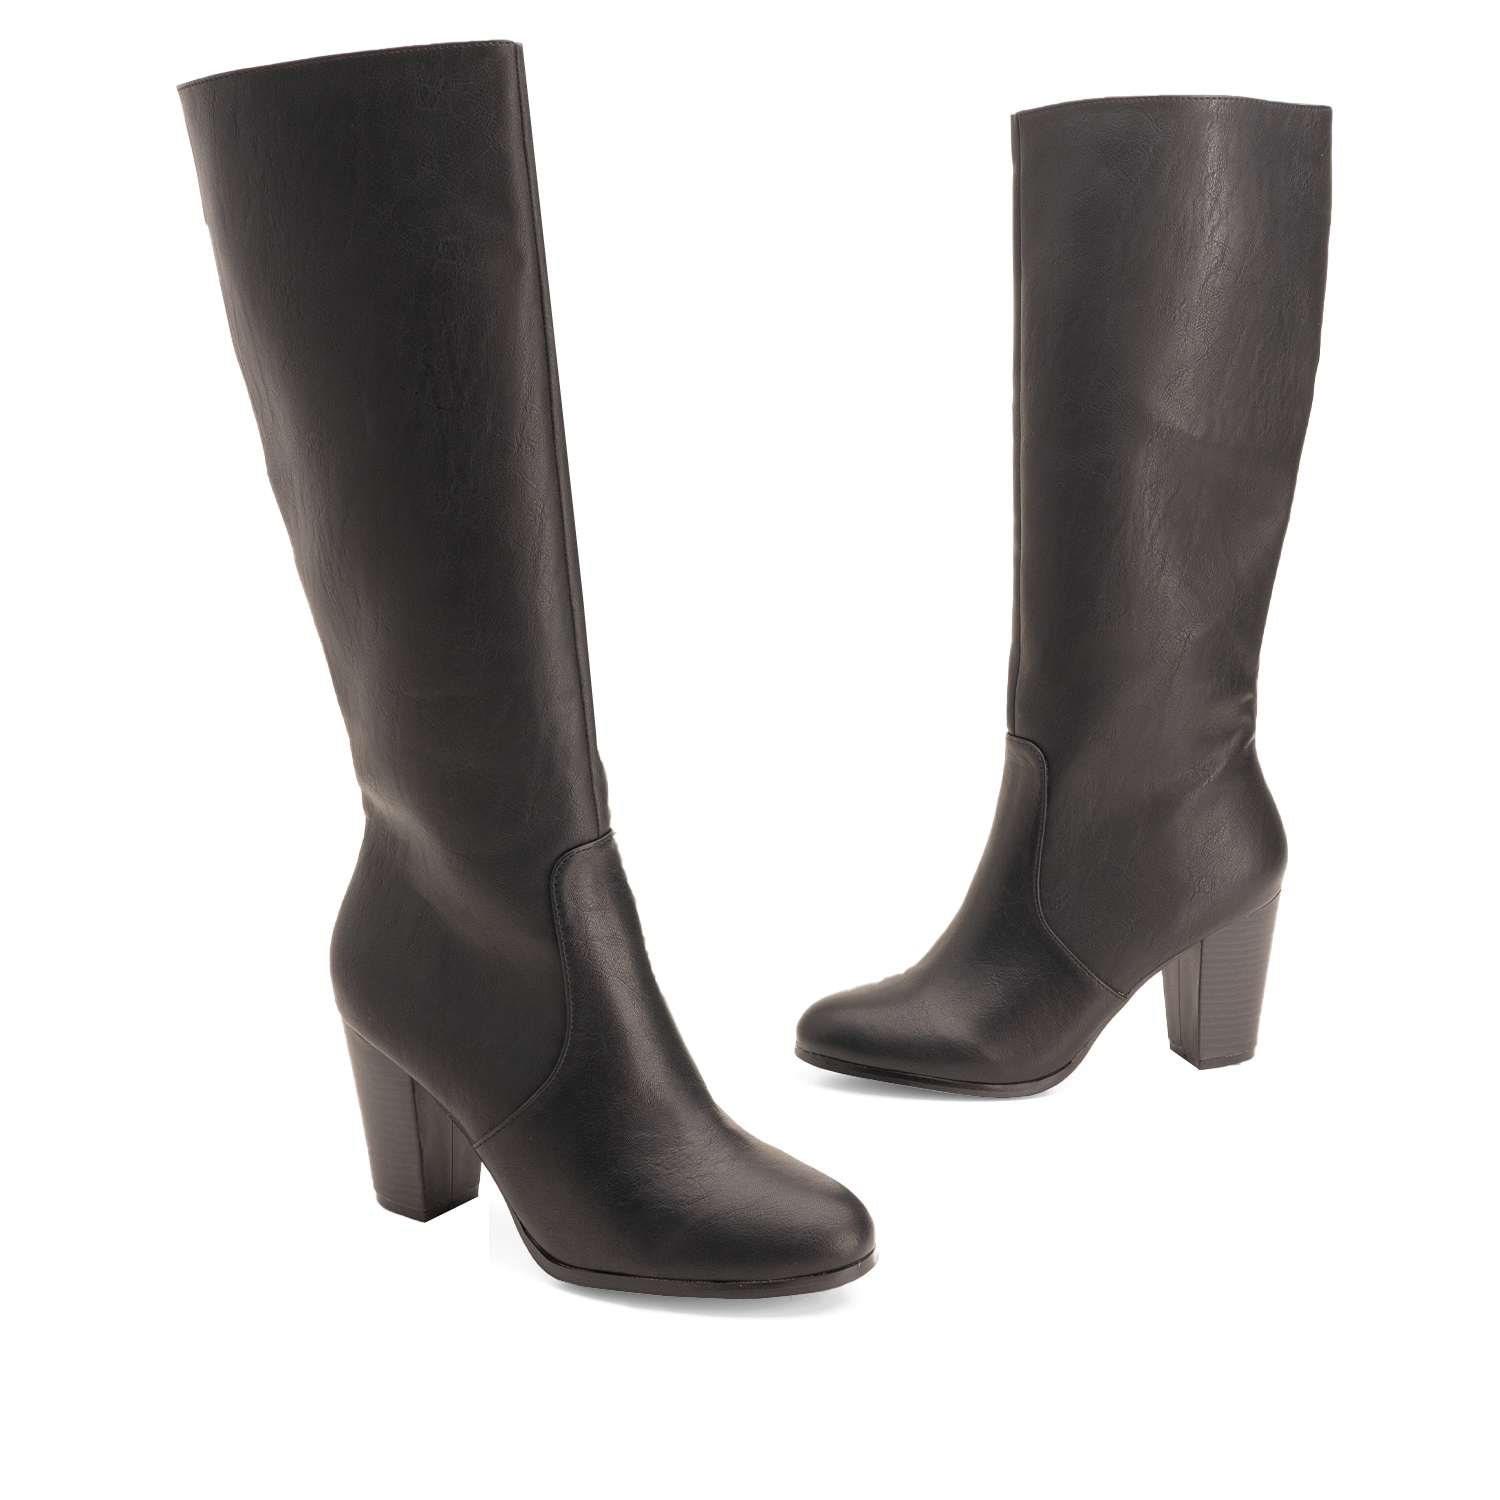 Heled mid-calf boots in black faux leather 